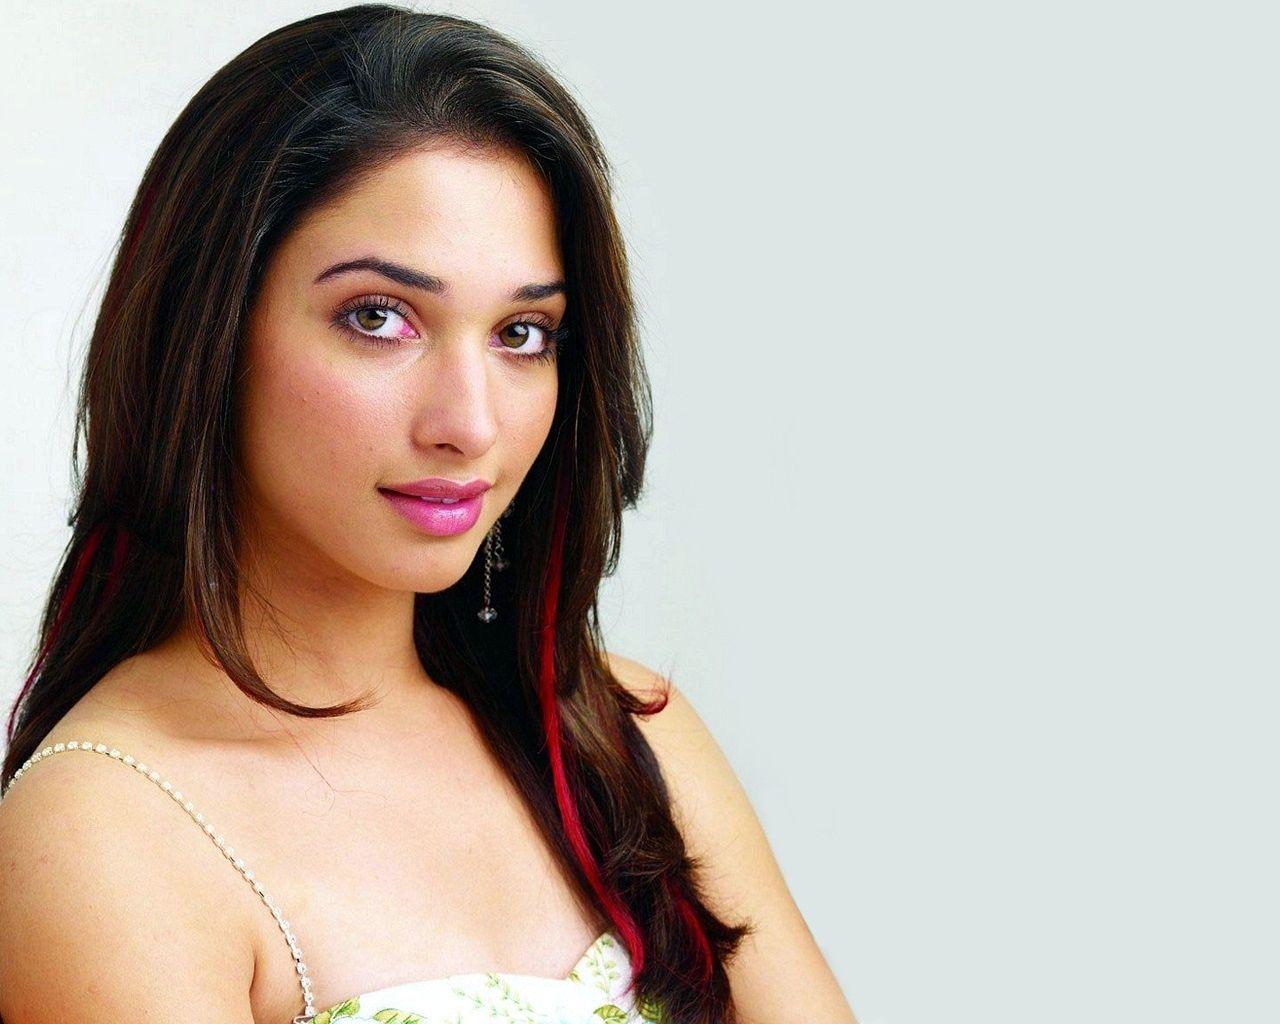 Tamanna South Actress Wallpaper in jpg format for free download